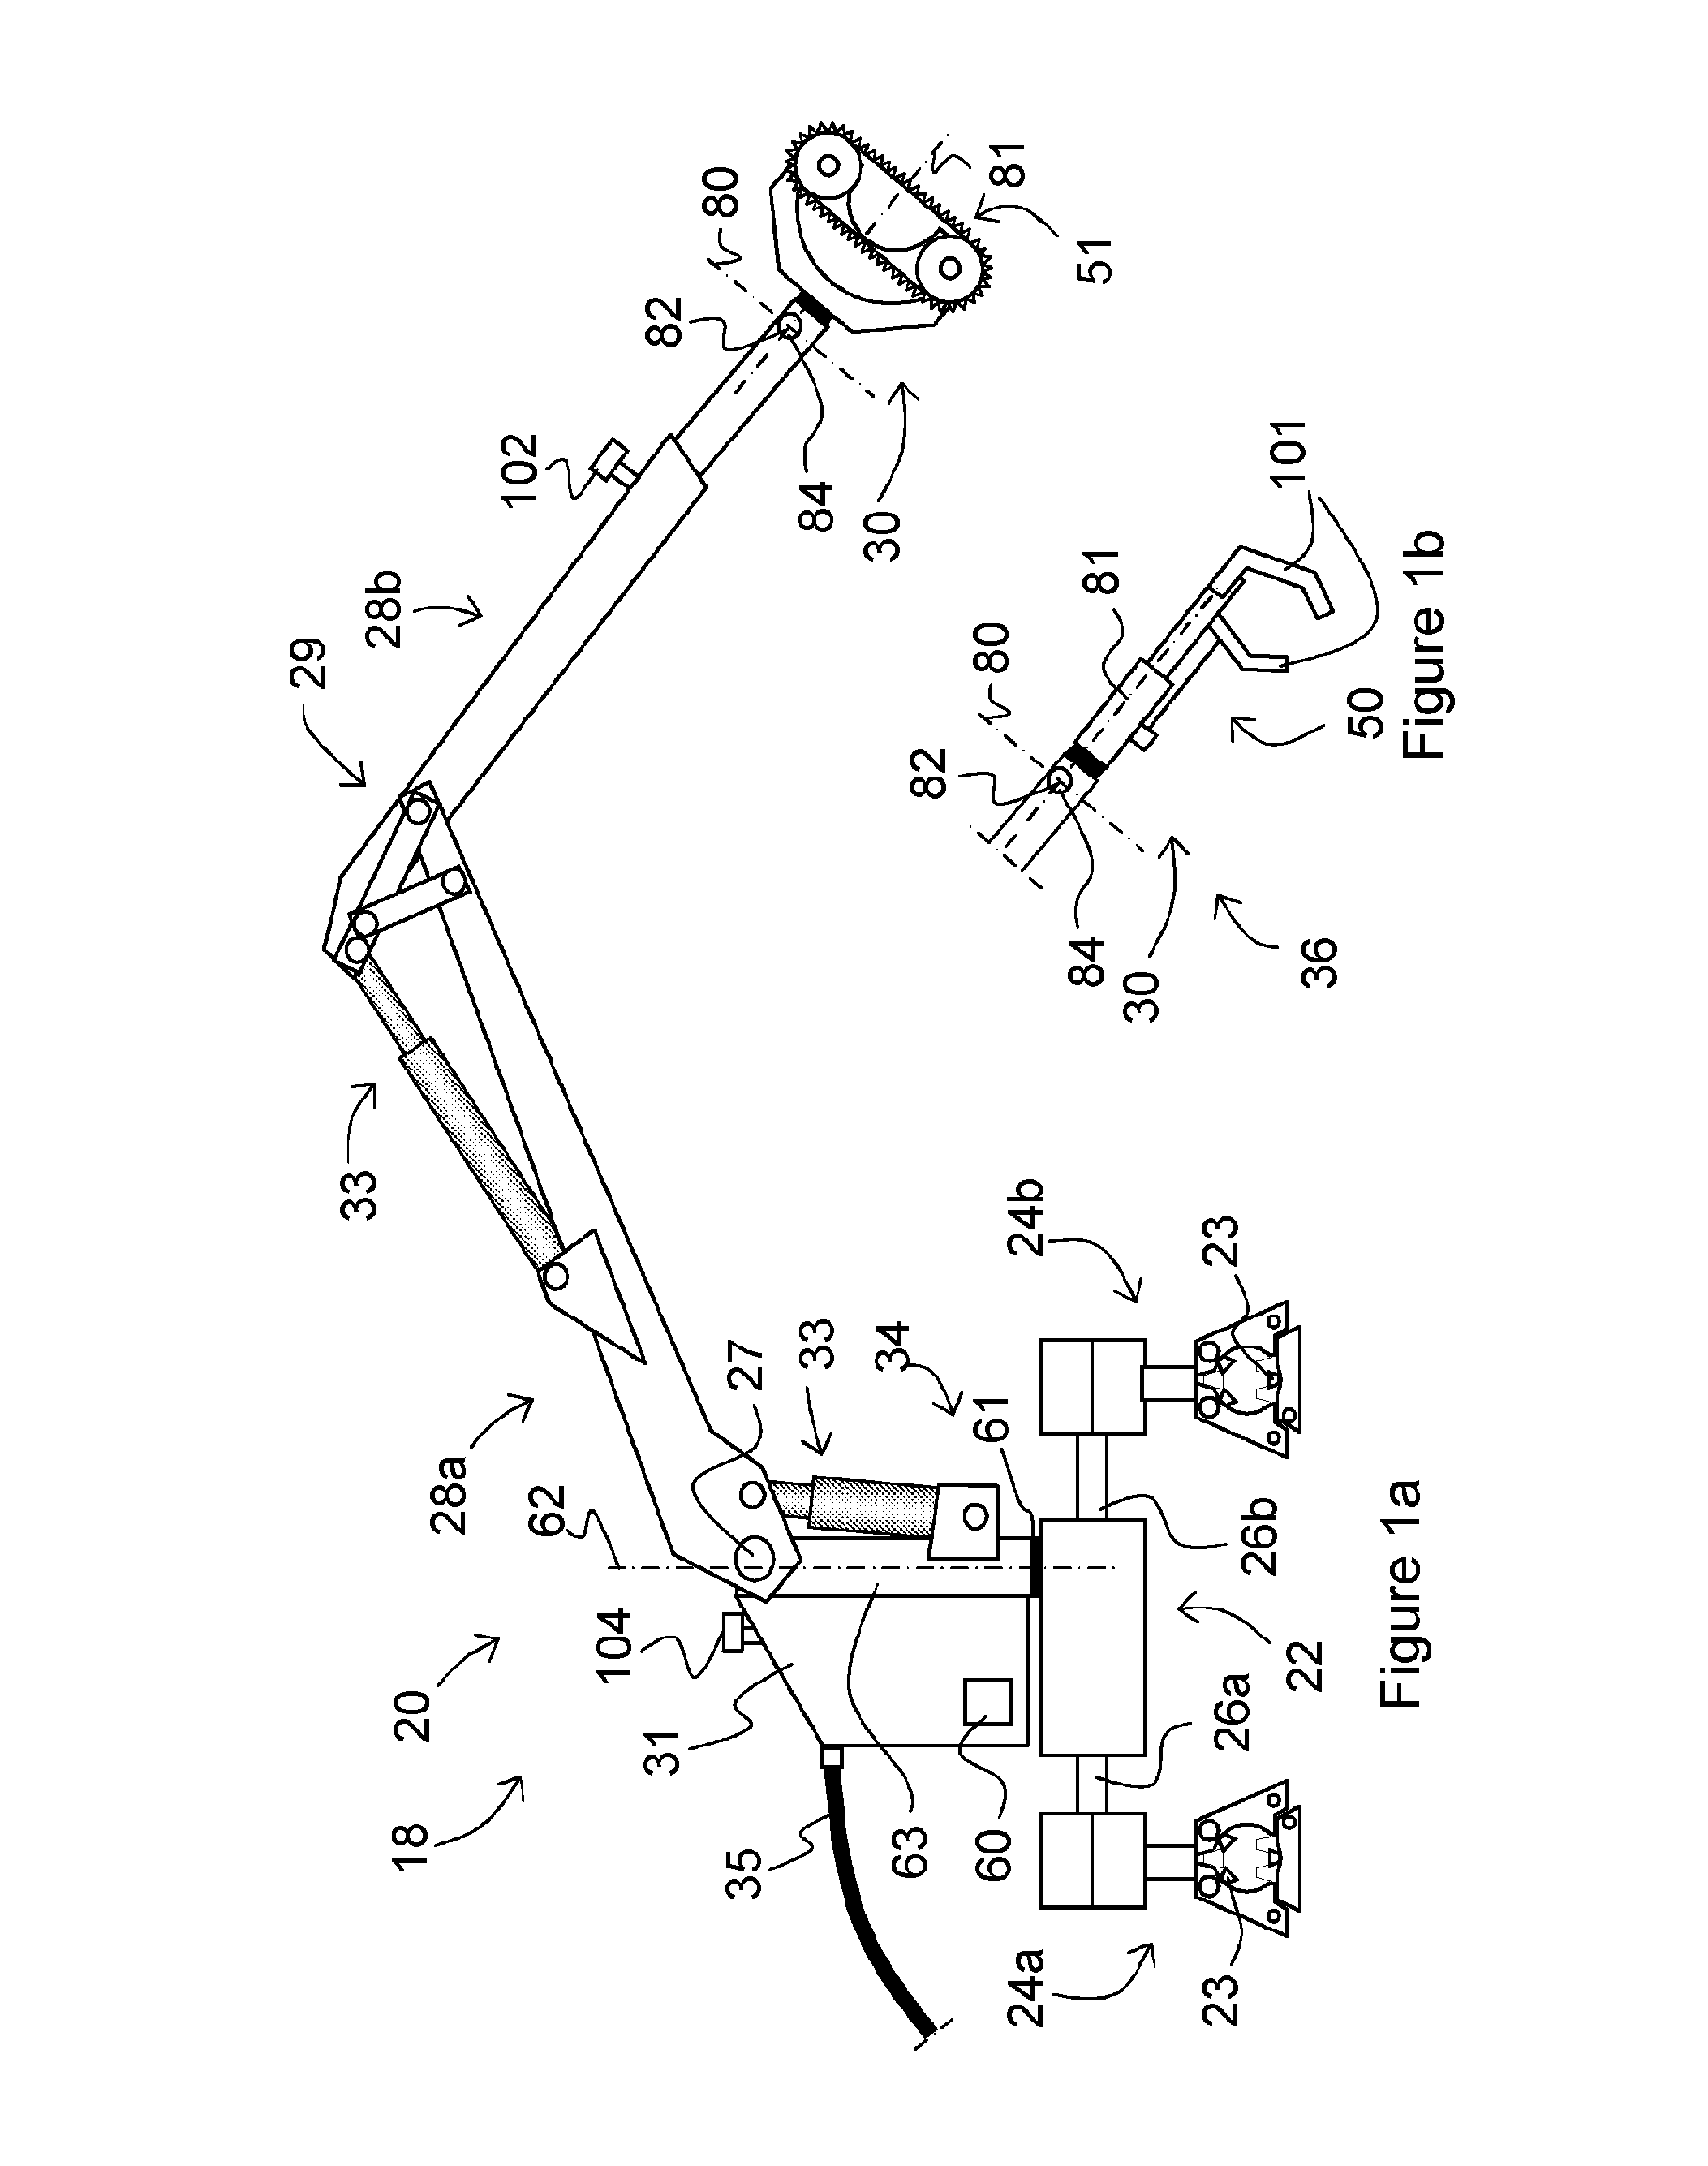 Method and device for assembling or disassembling a structure under water